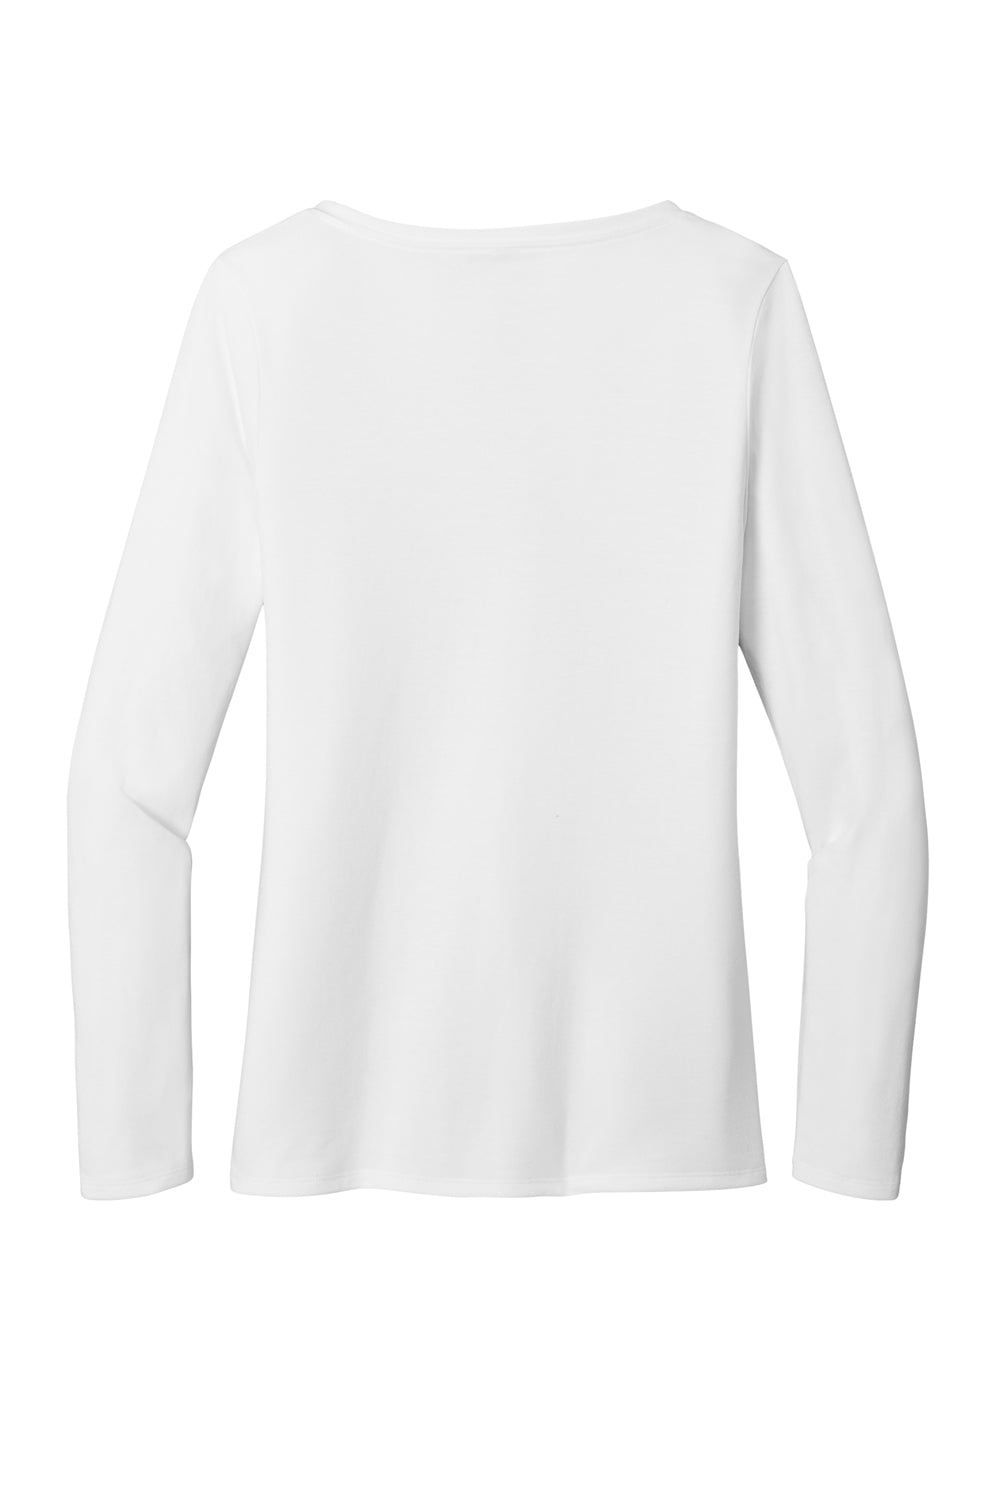 District DT135 Womens Perfect Tri Long Sleeve V-Neck T-Shirt White Flat Back